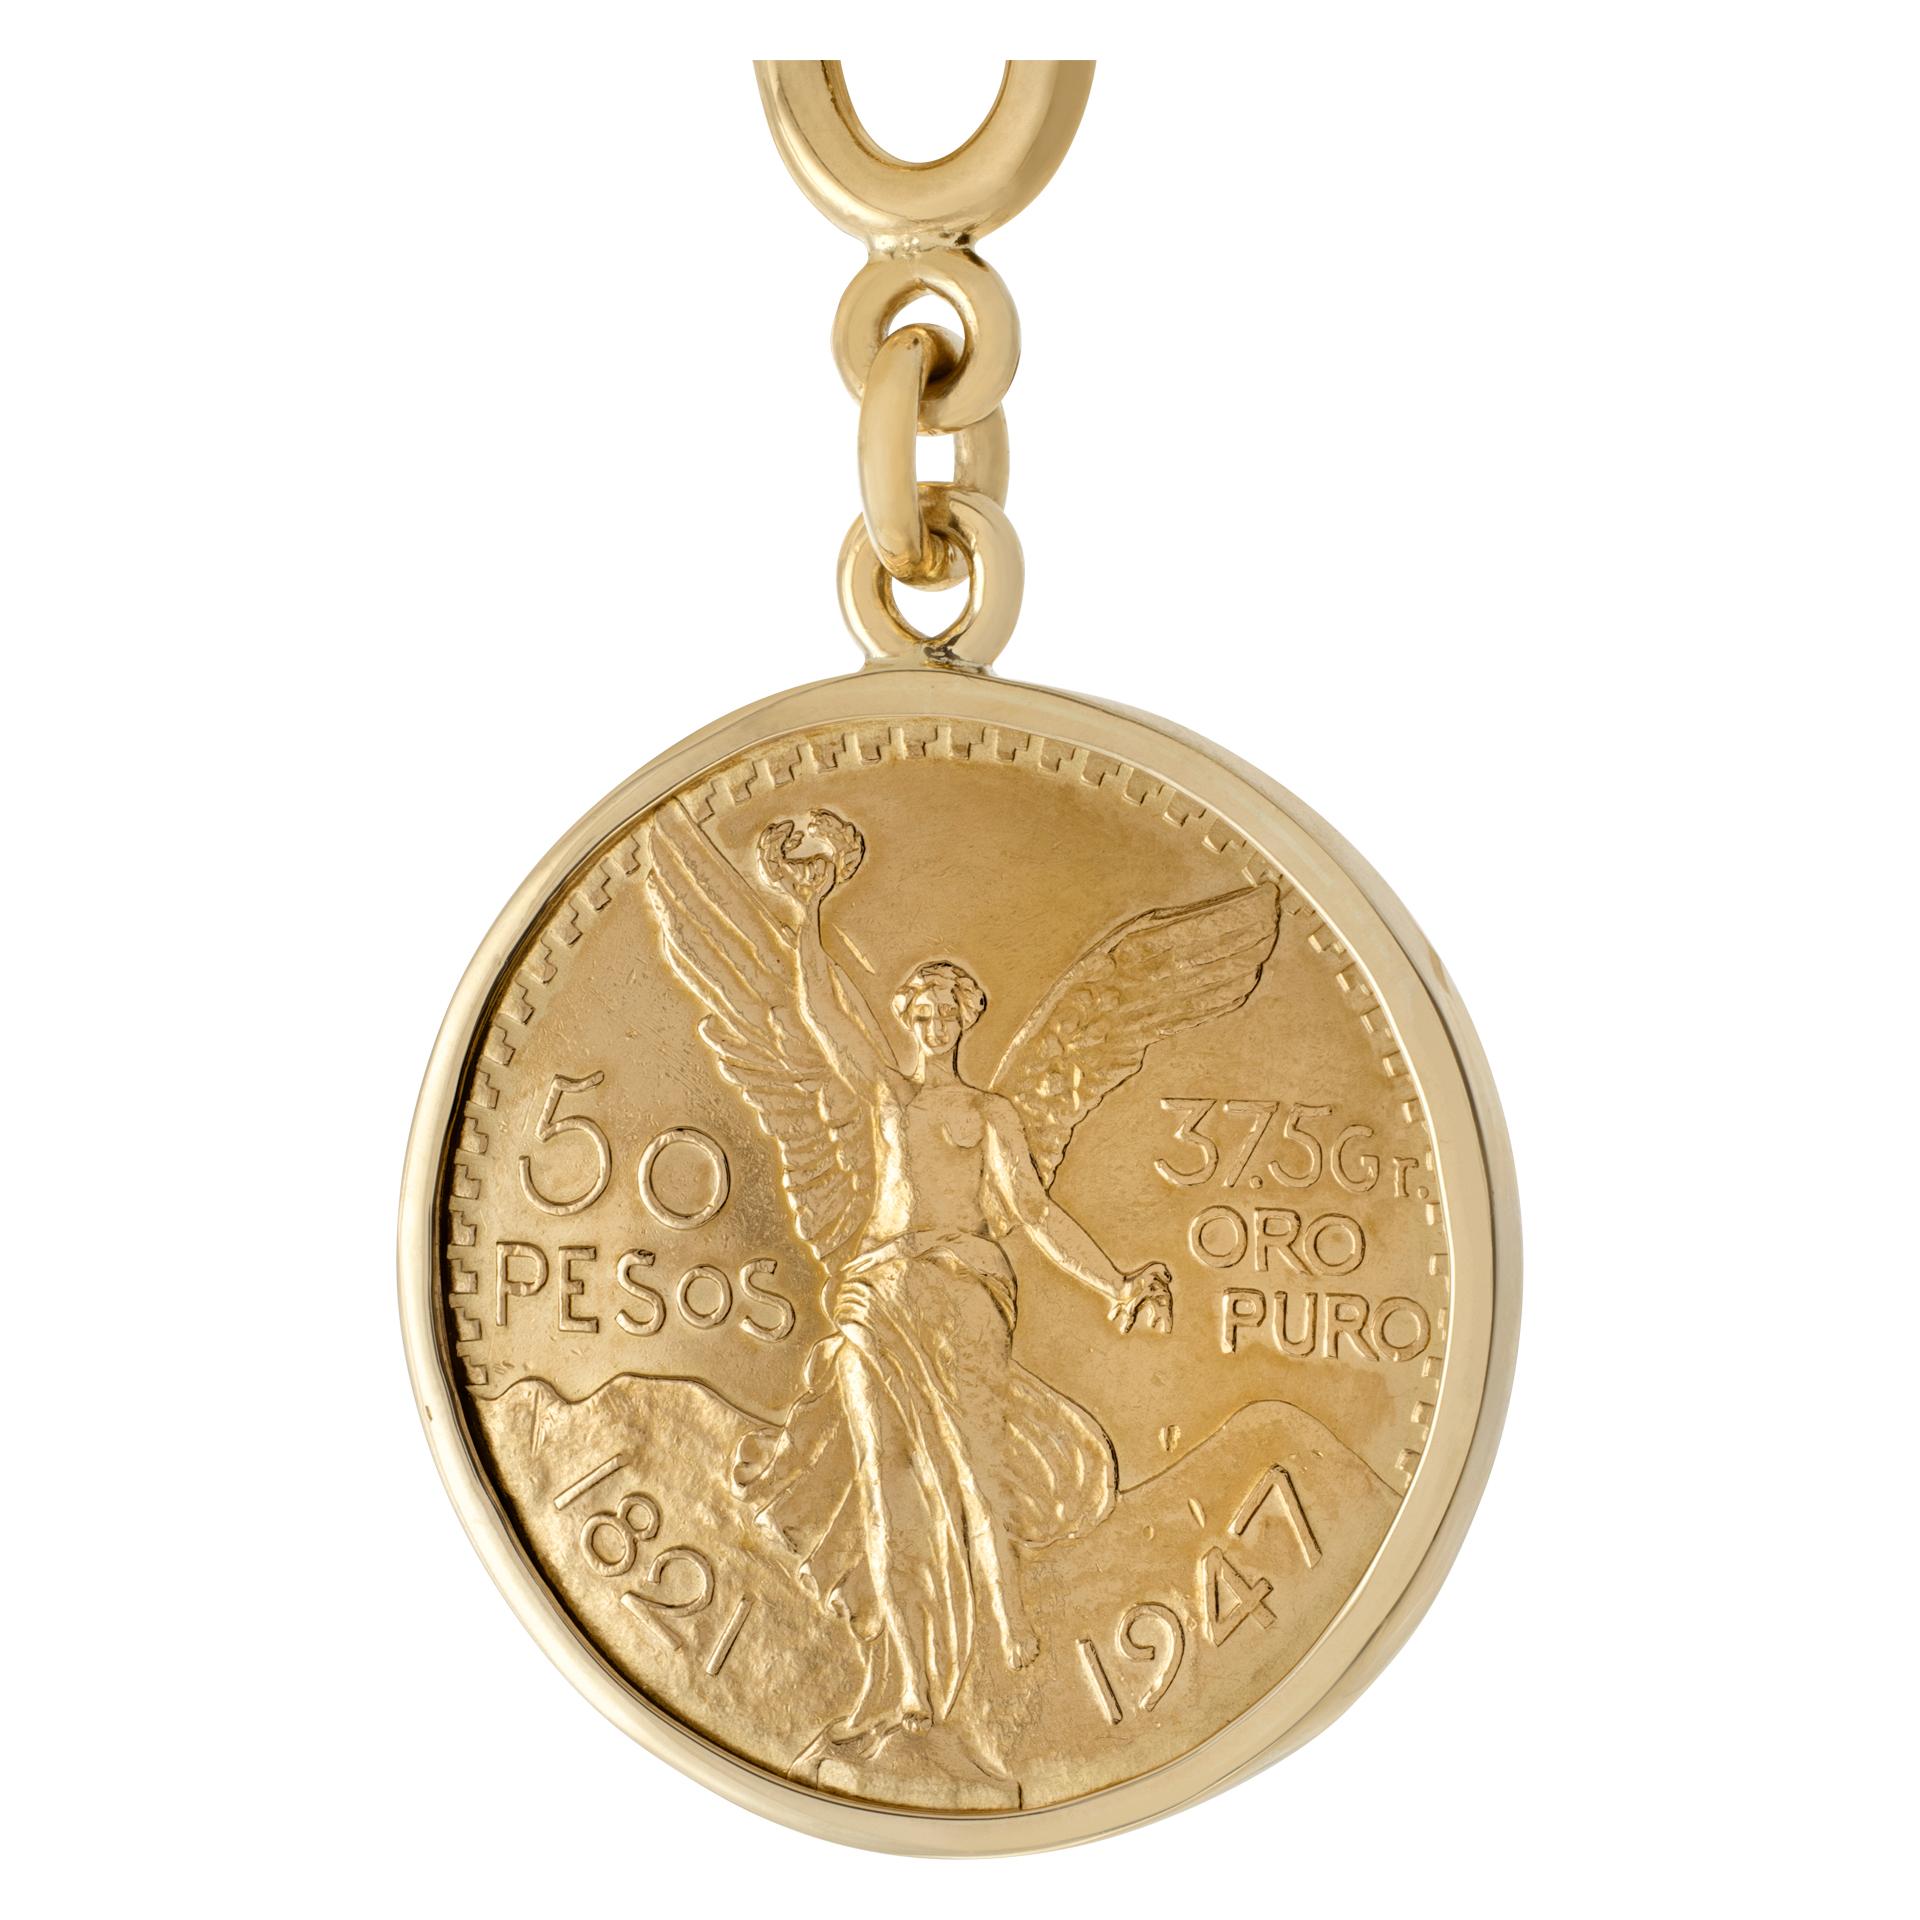 50 pesos mexican coin and keychain in 18k gold. Coin has 1.2 ounces pure gold. Keychain and coin alone have gold value of approximately $3200.
